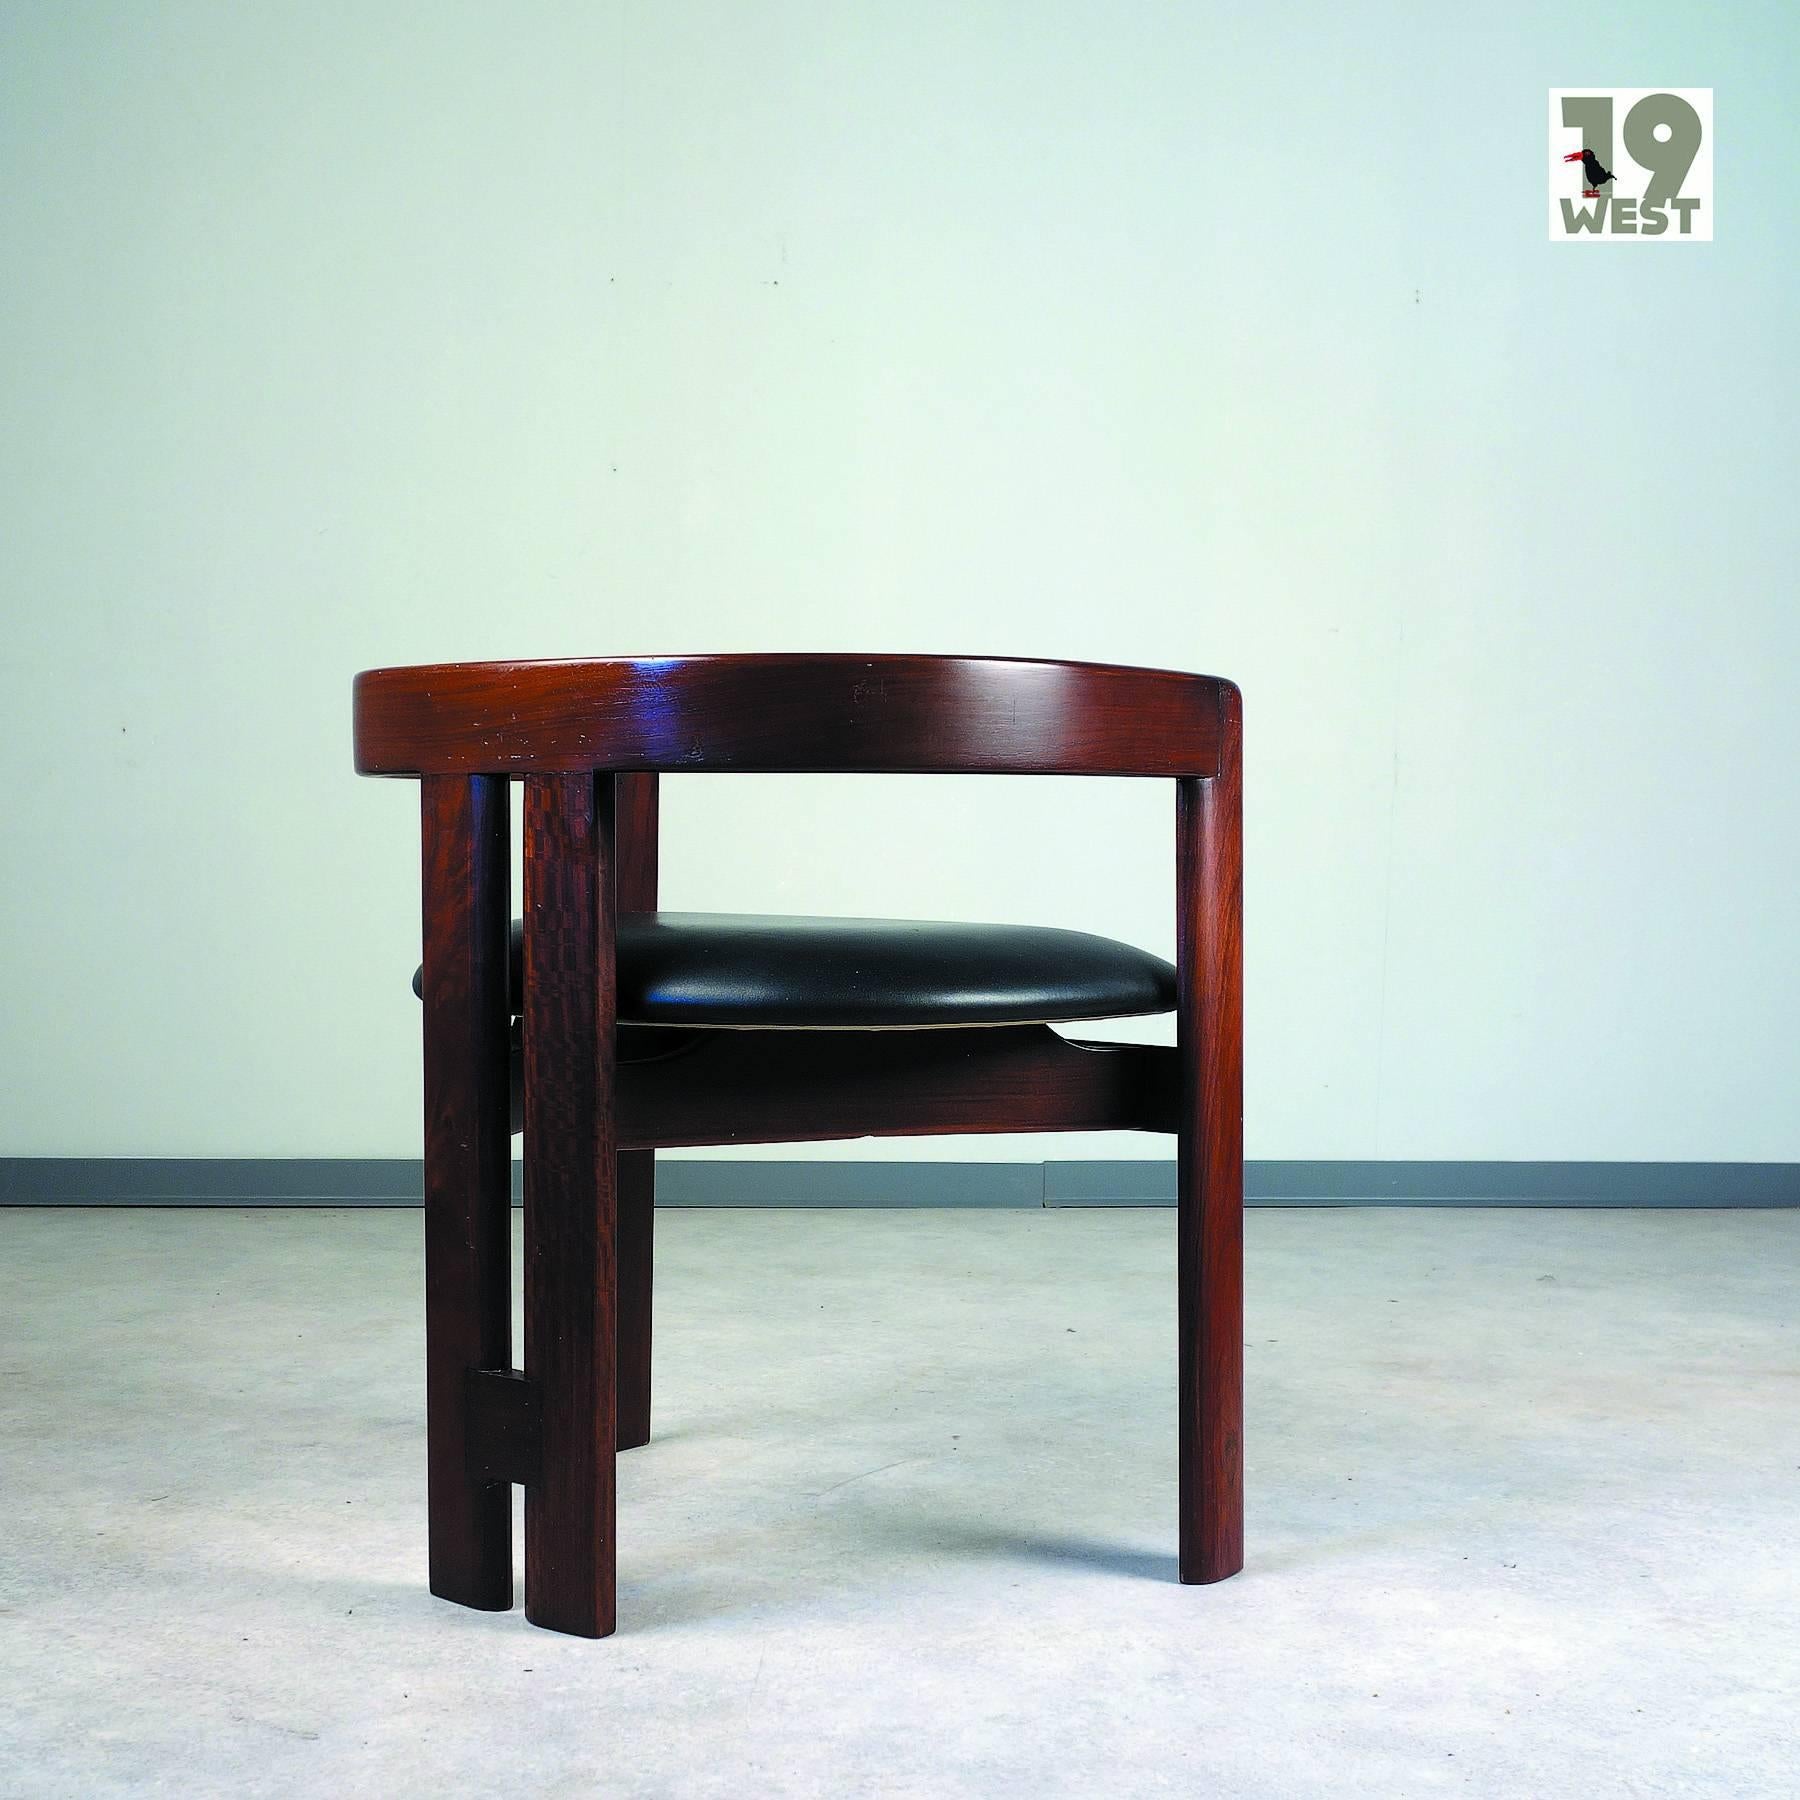 Italian Pigreco Armchair, Designed by Afra & Tobia Scarpa, Manufactured by Gavina